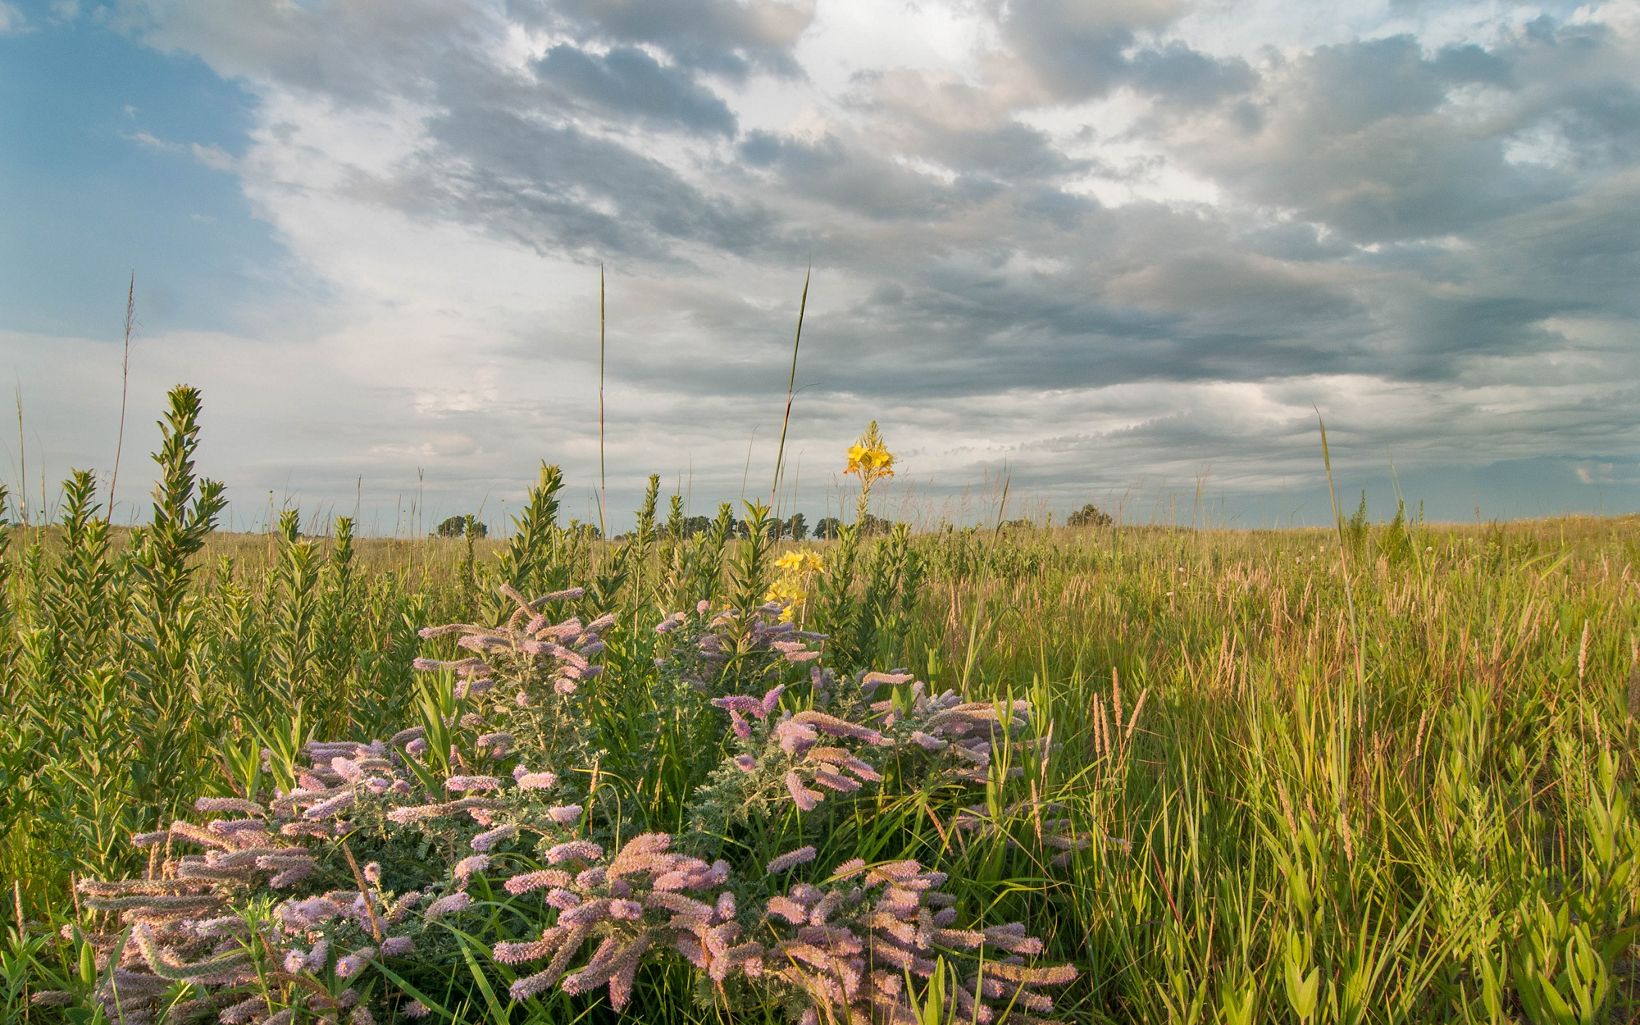 Platte River Prairie, Nebraska Prairies and grasslands store significant amounts of carbon, making their conservation a high-potential pathway. © Chris Helzer/TNC